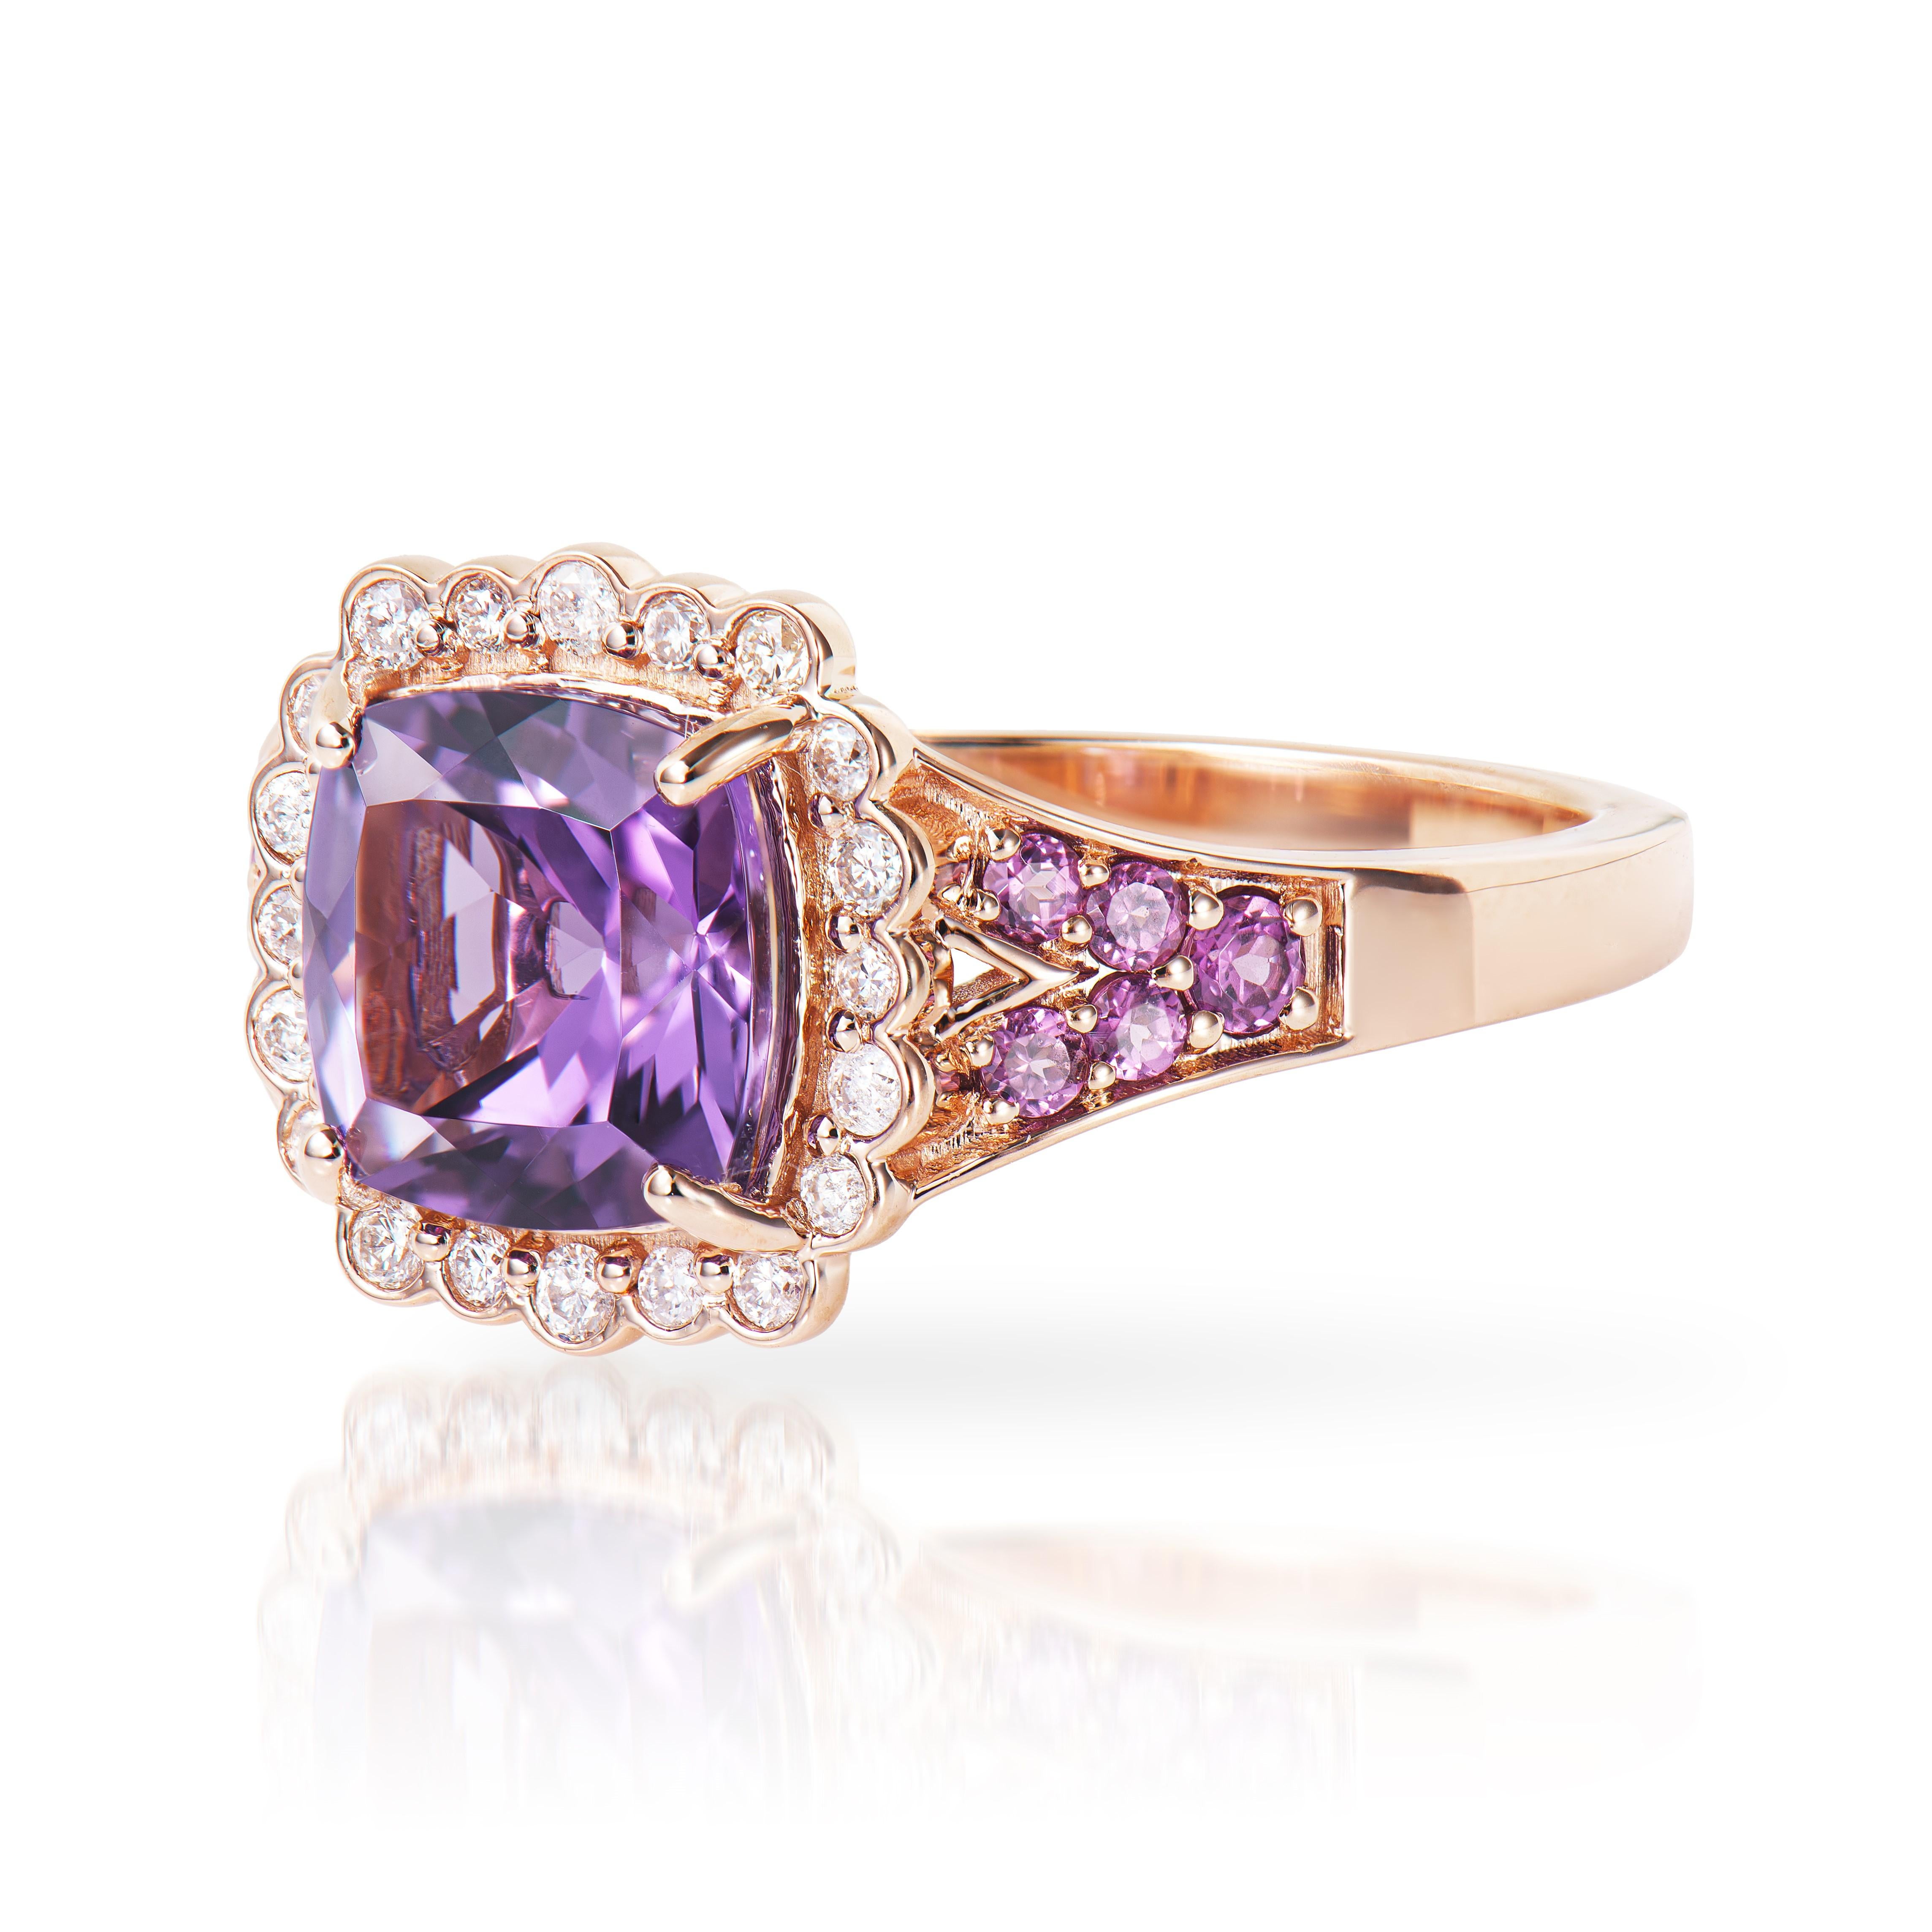 Cushion Cut 2.05 Carat Amethyst Fancy Ring in 14KRG with Rhodolite and White Diamond.   For Sale